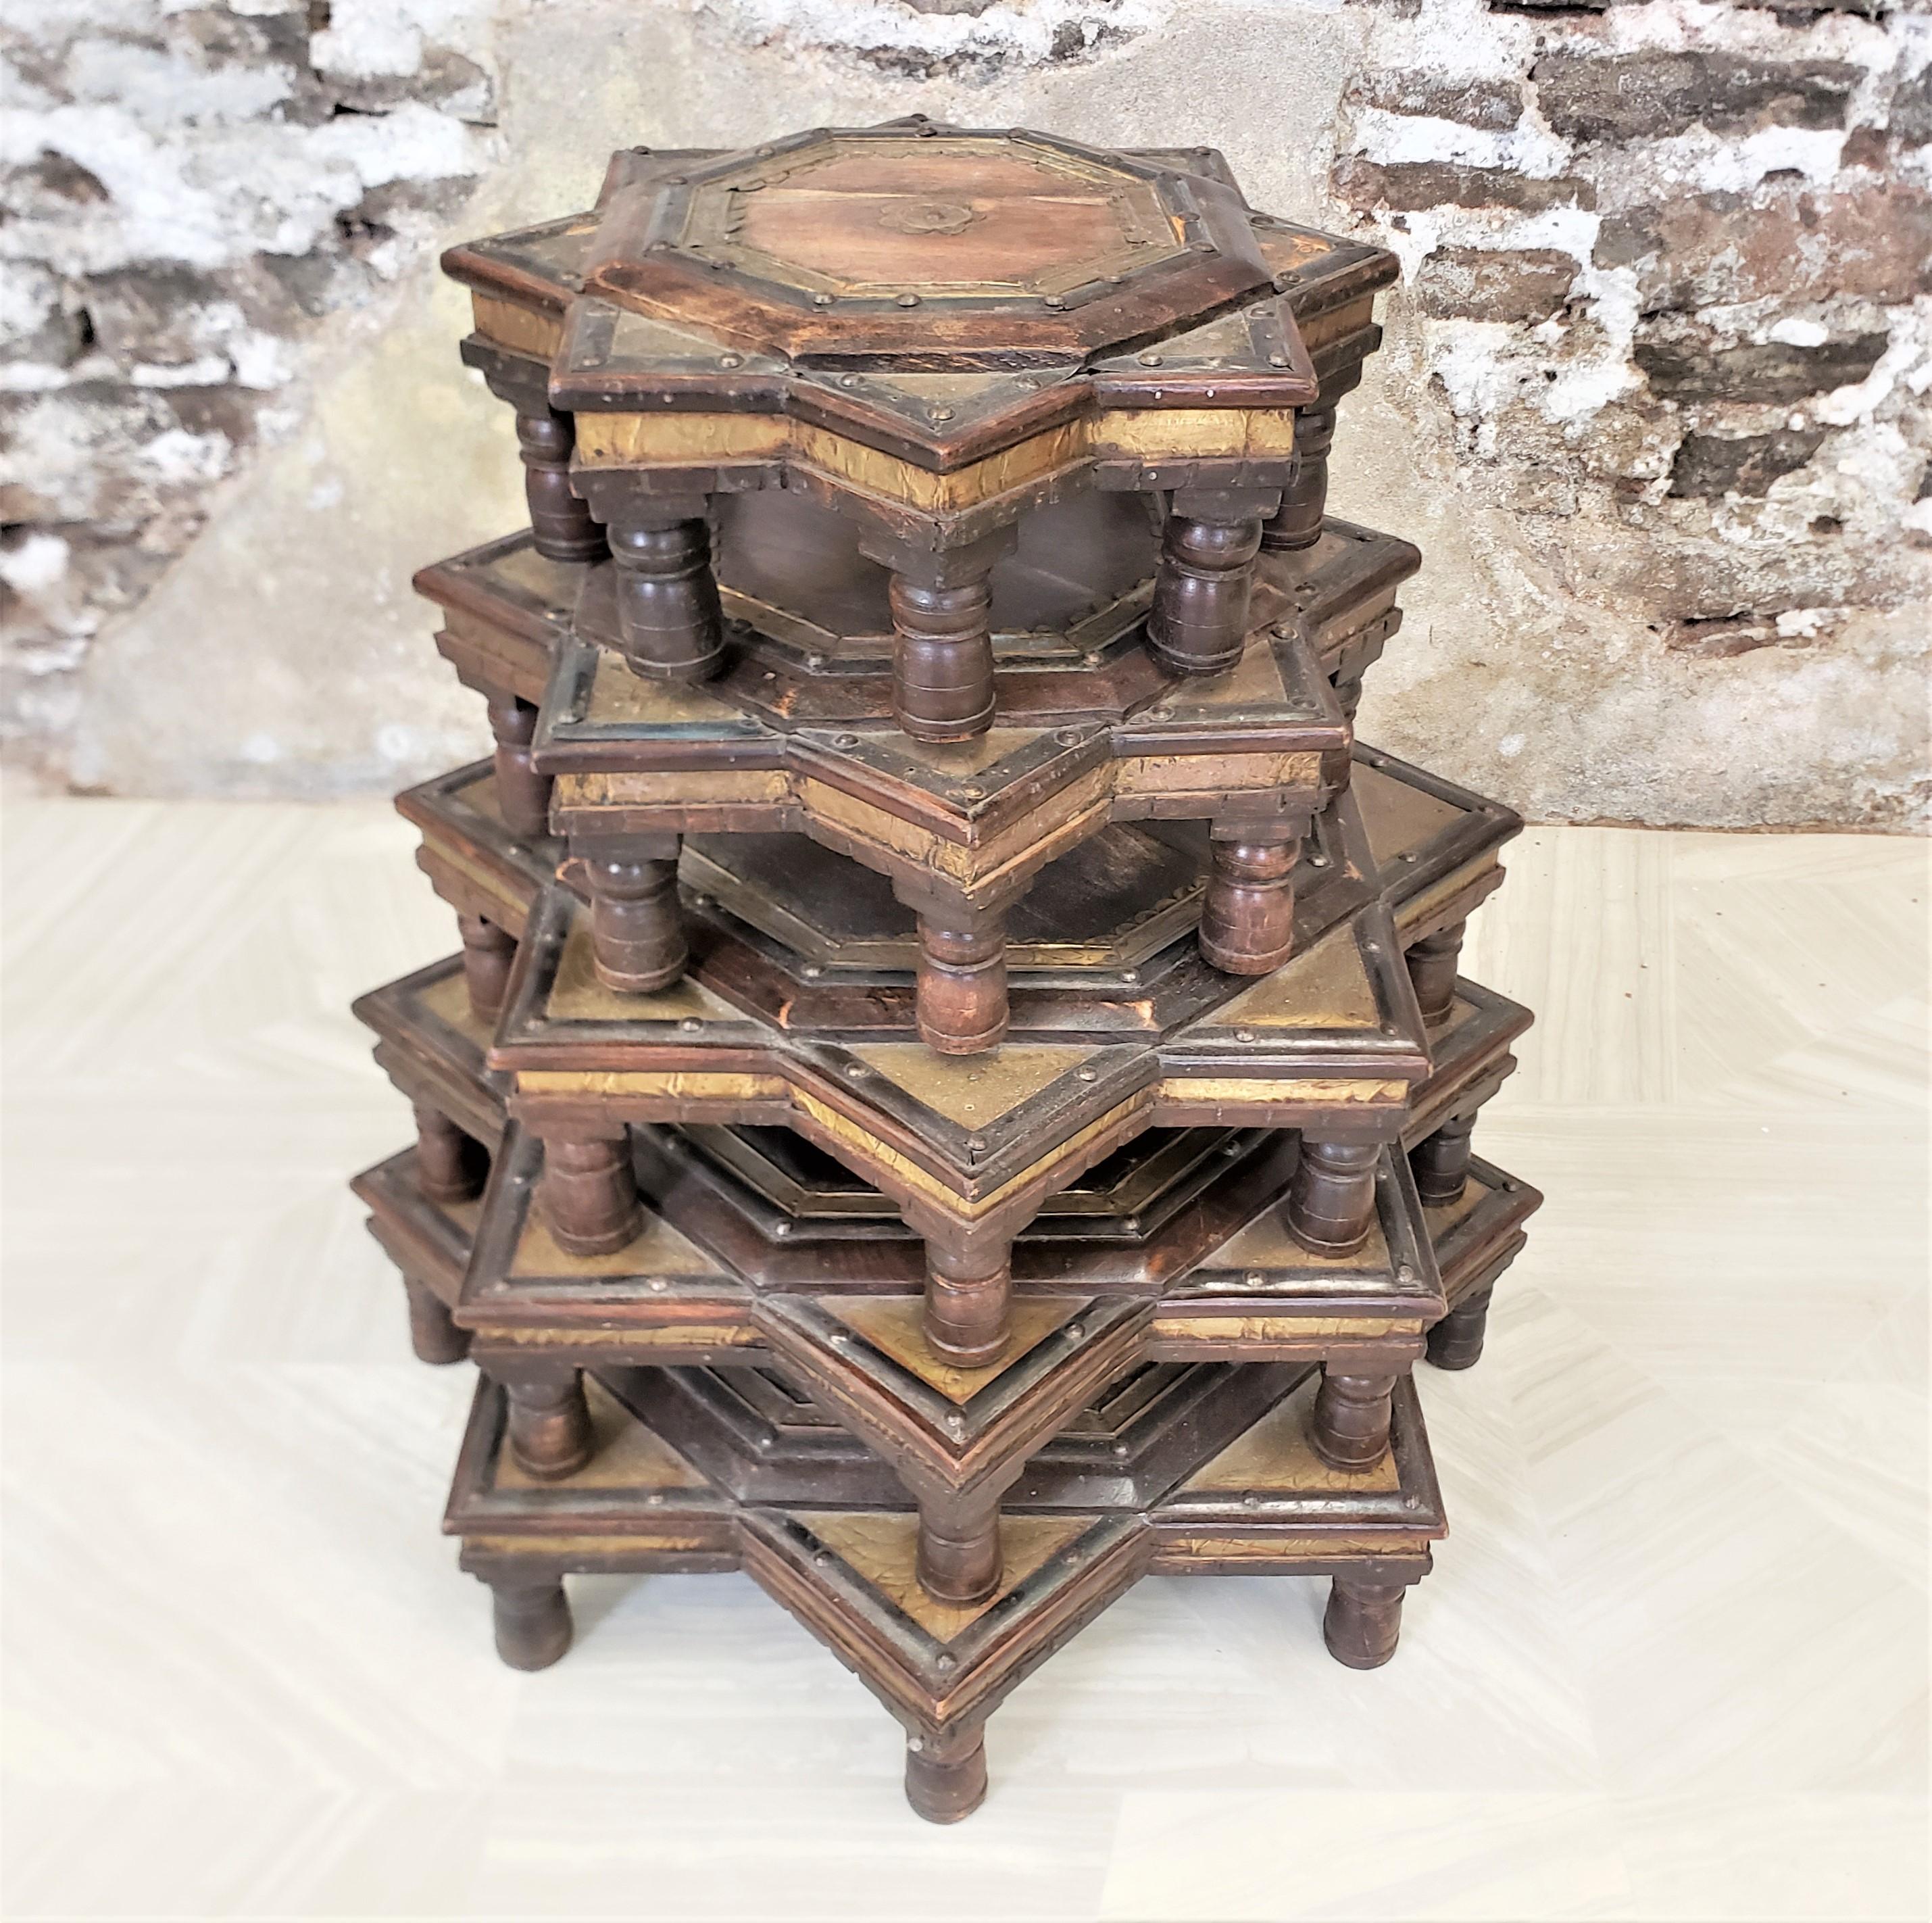 This set of five graduated stacking tables show no maker's marks, but are presumed to have originated from India and dating to approximately 1920 and done in an Anglo-Indian style. The tables are constructed of solid wood and done in a stylized star